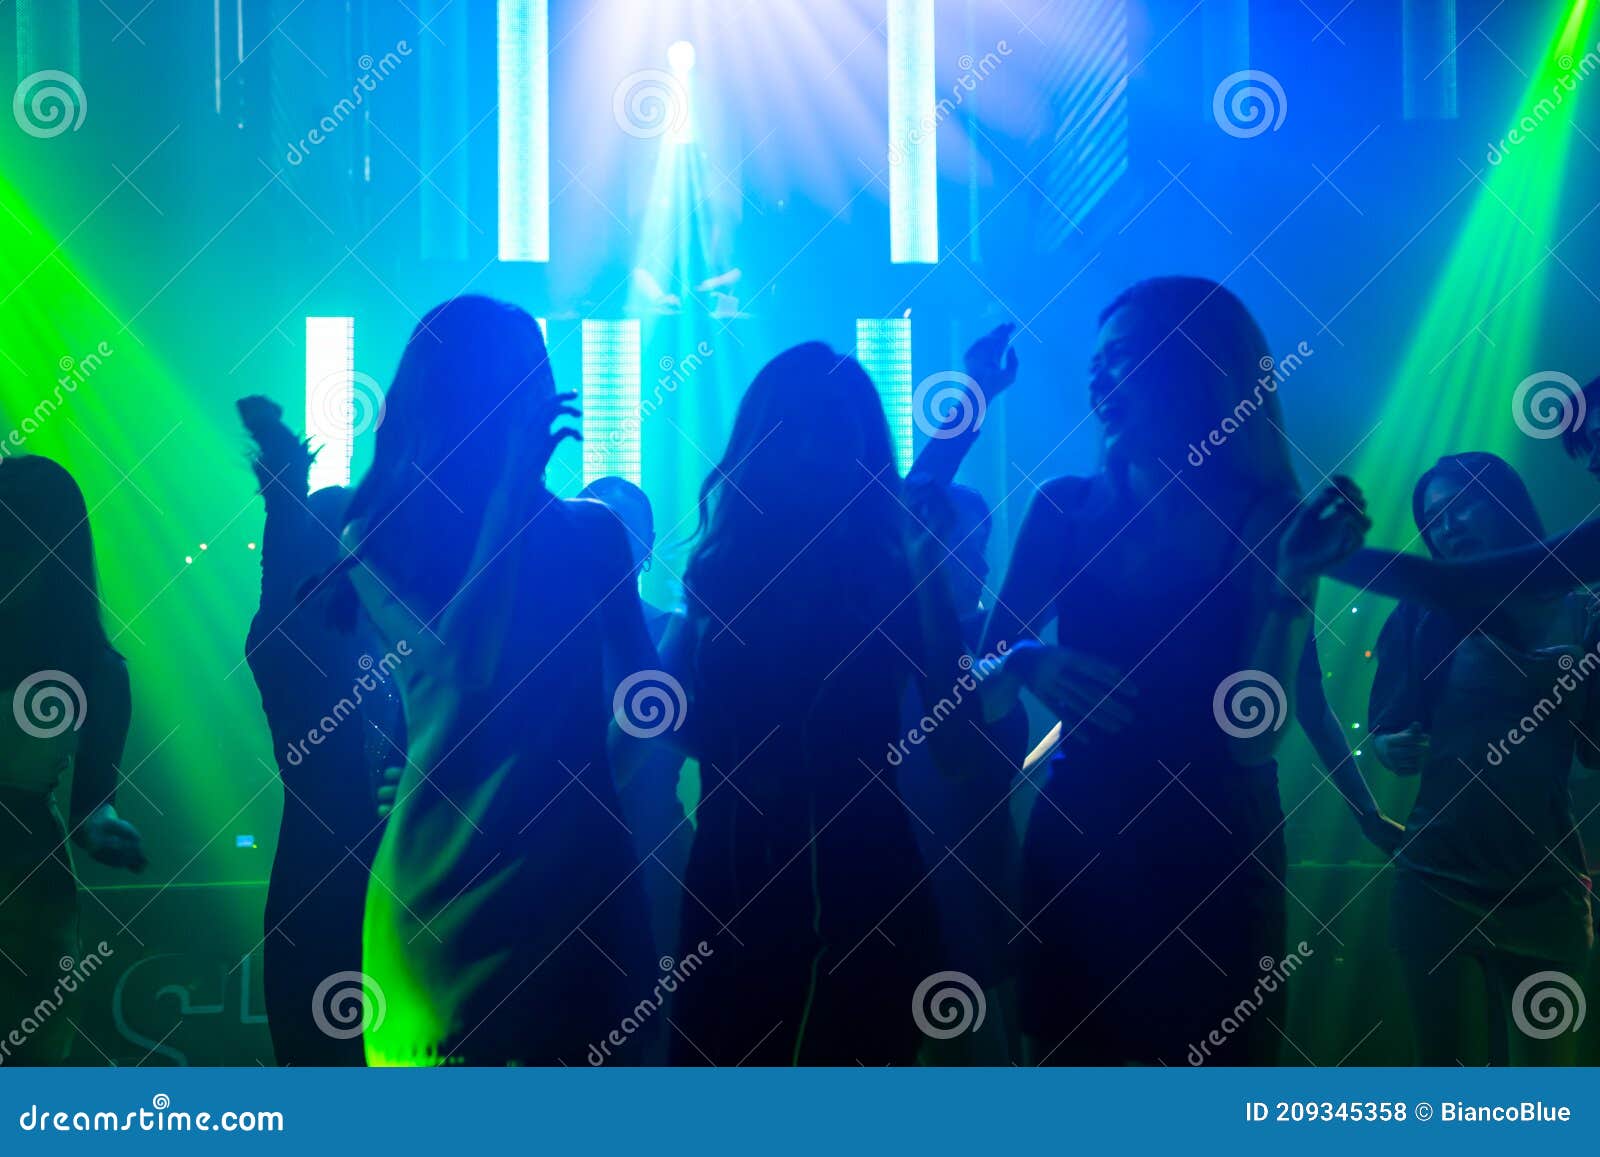 Silhouette Image of People Dance in Disco Night Club To Music from DJ ...